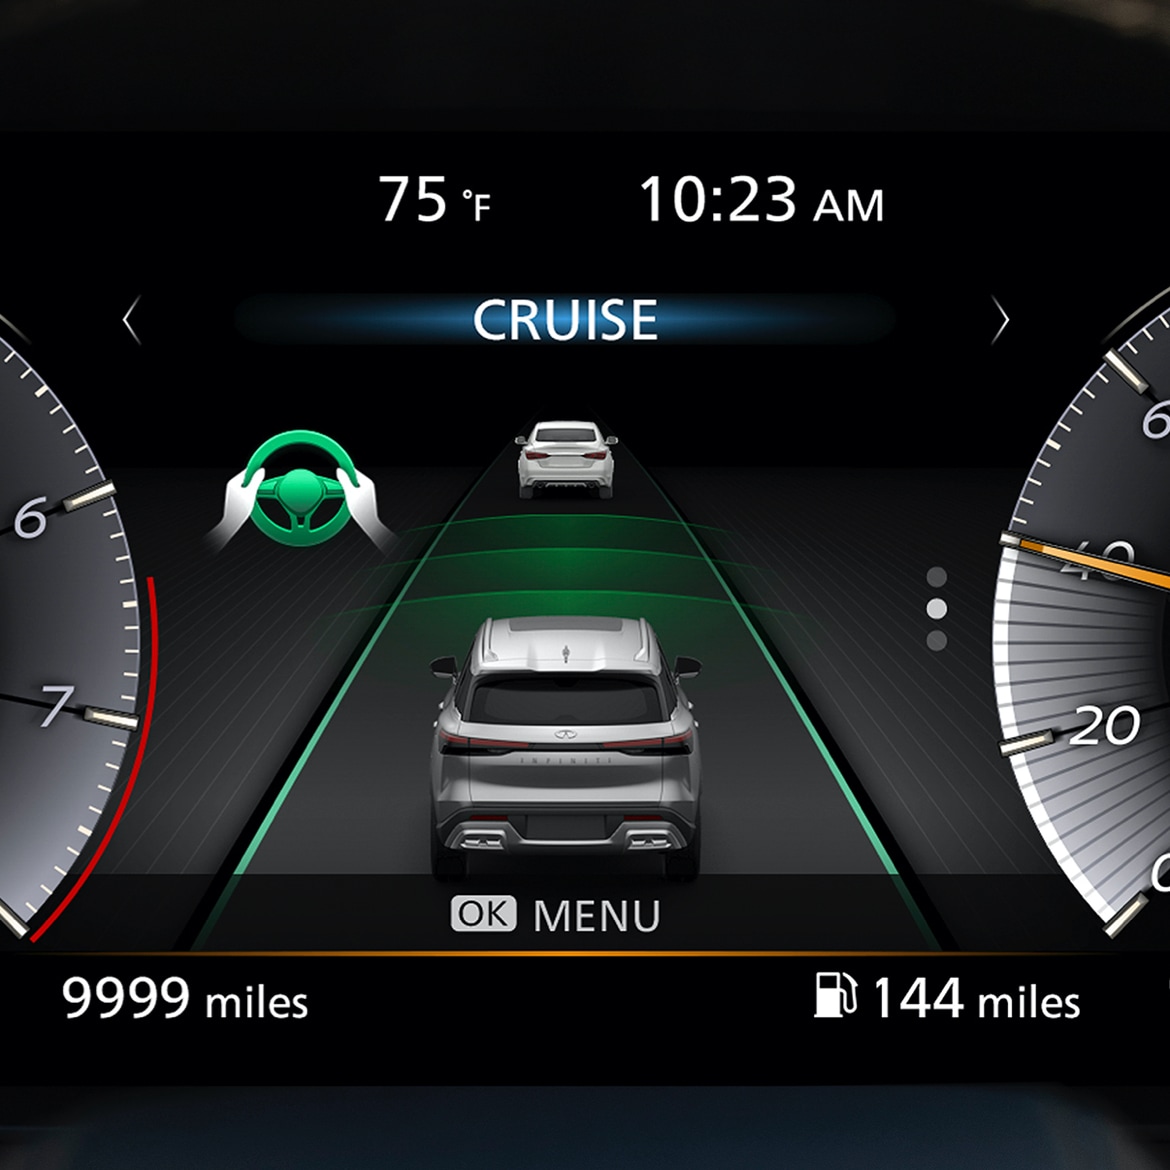 ProPILOT Assist safety feature on the display panel